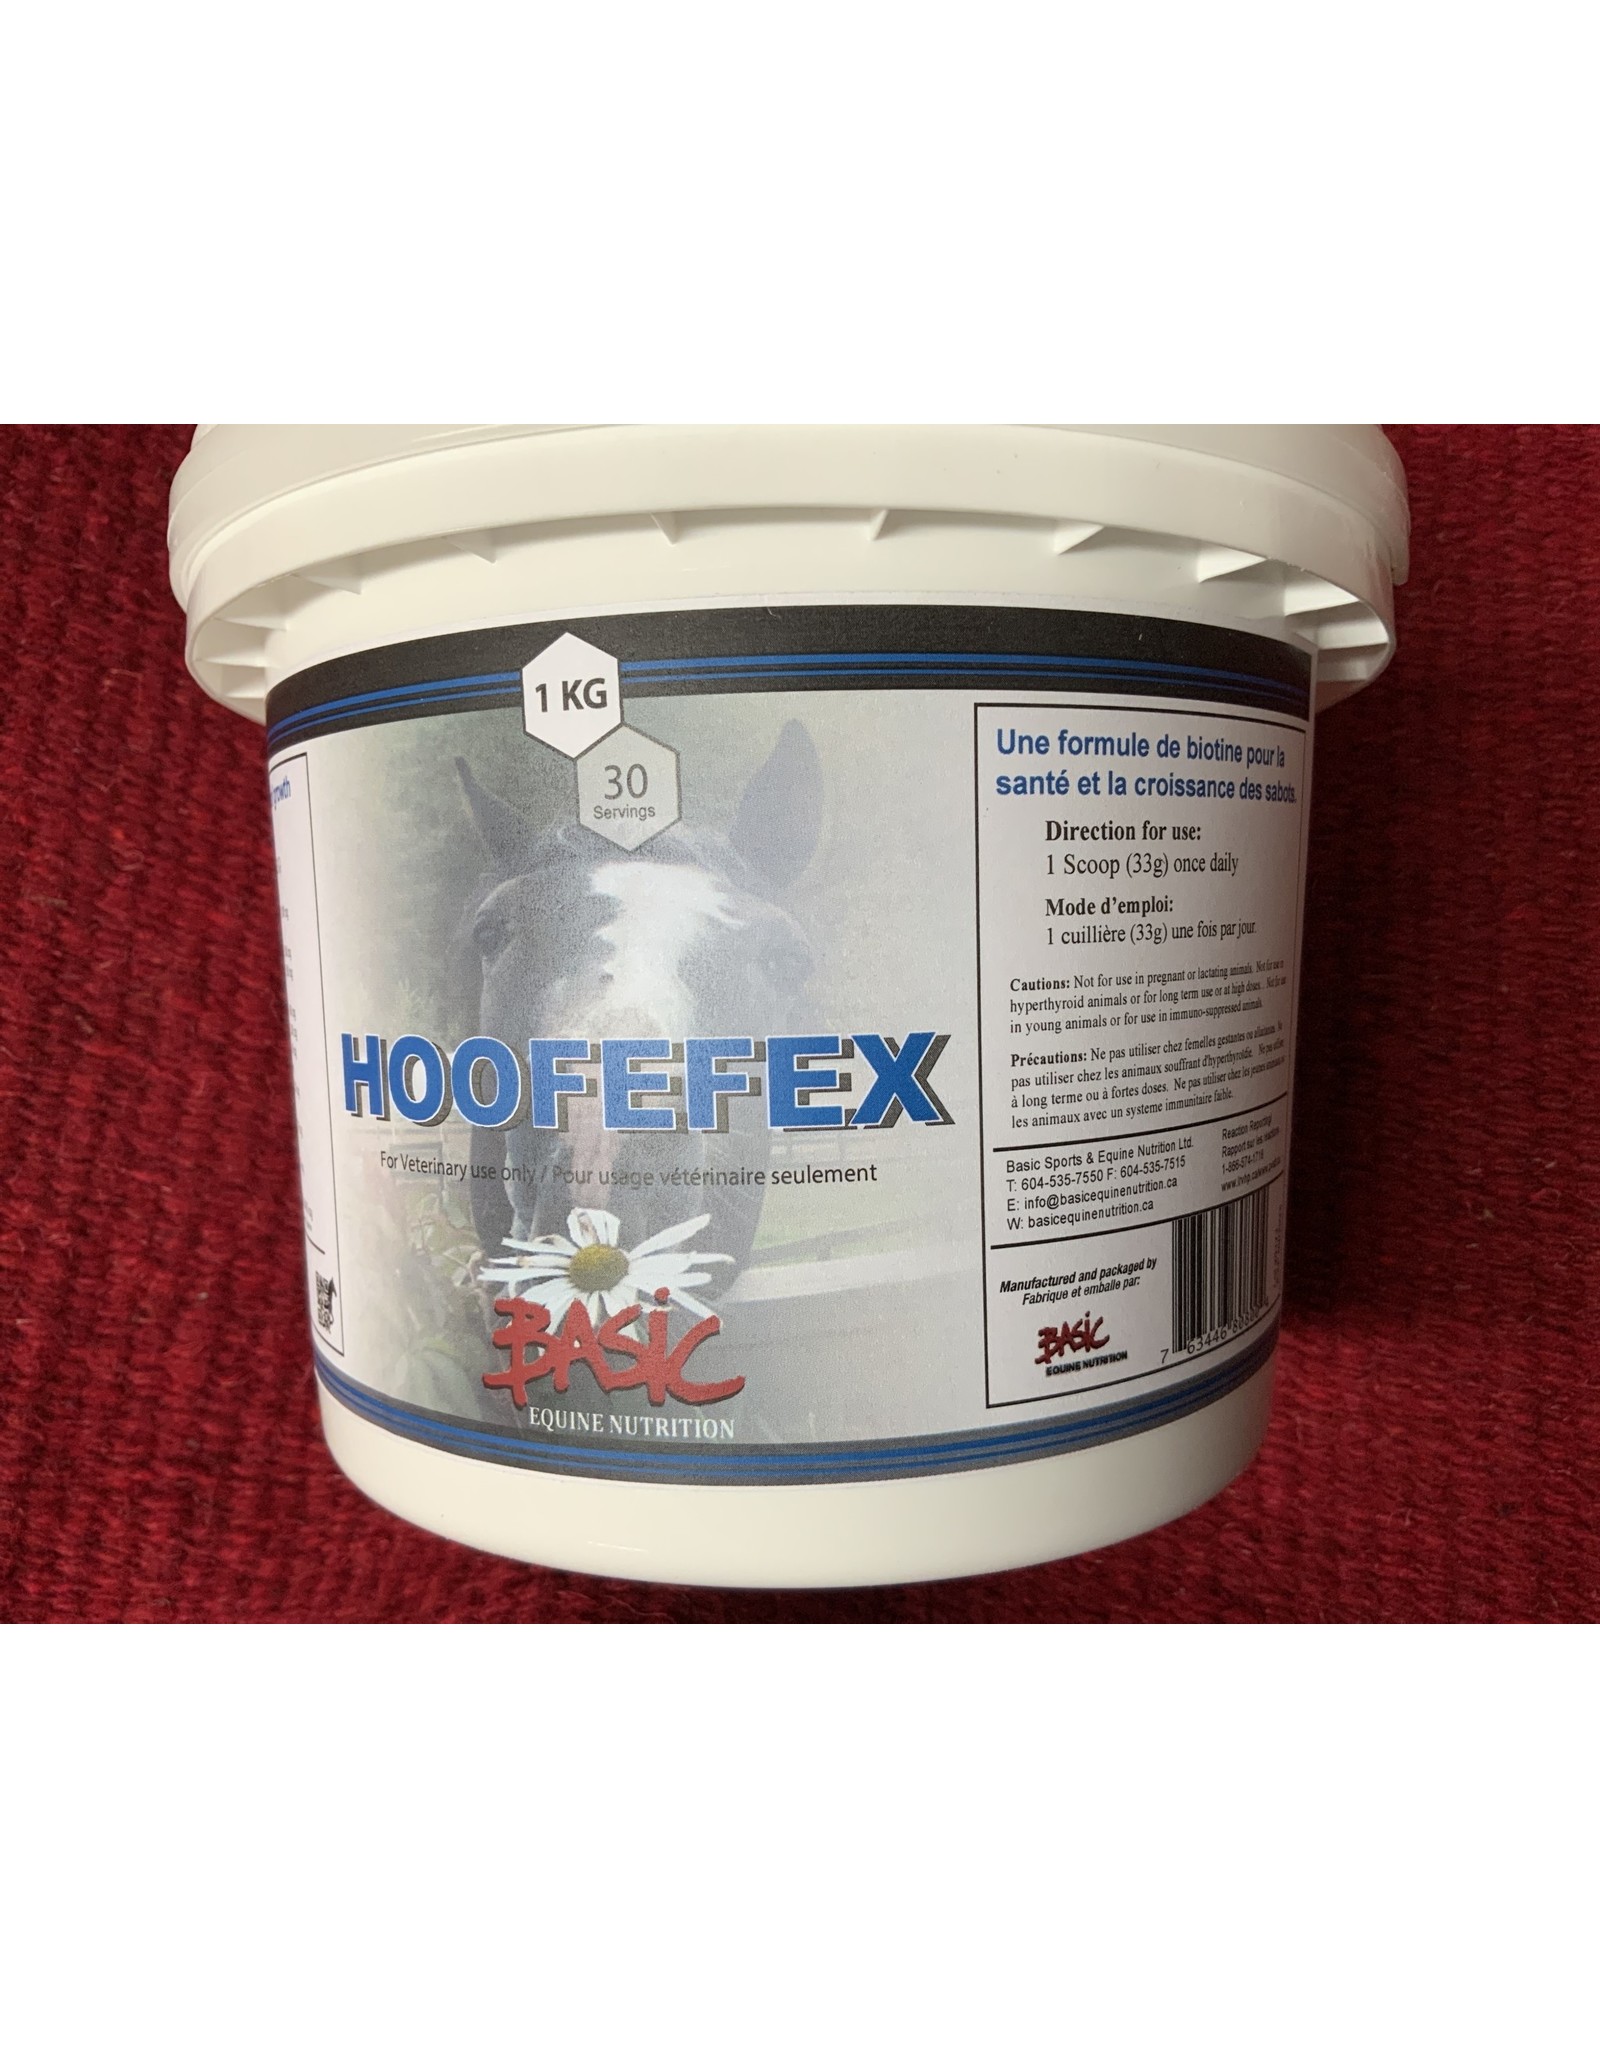 Hoofefex 1kg - 80800 INGREDIENTS: Biotin, Methionine, Lysine, Zinc, Copper, Manganese, MSM, Kelp and Brewer’s Yeast in a base of nutritional canola, flax, oat hulls and alfalfa. For hoof growth and health.